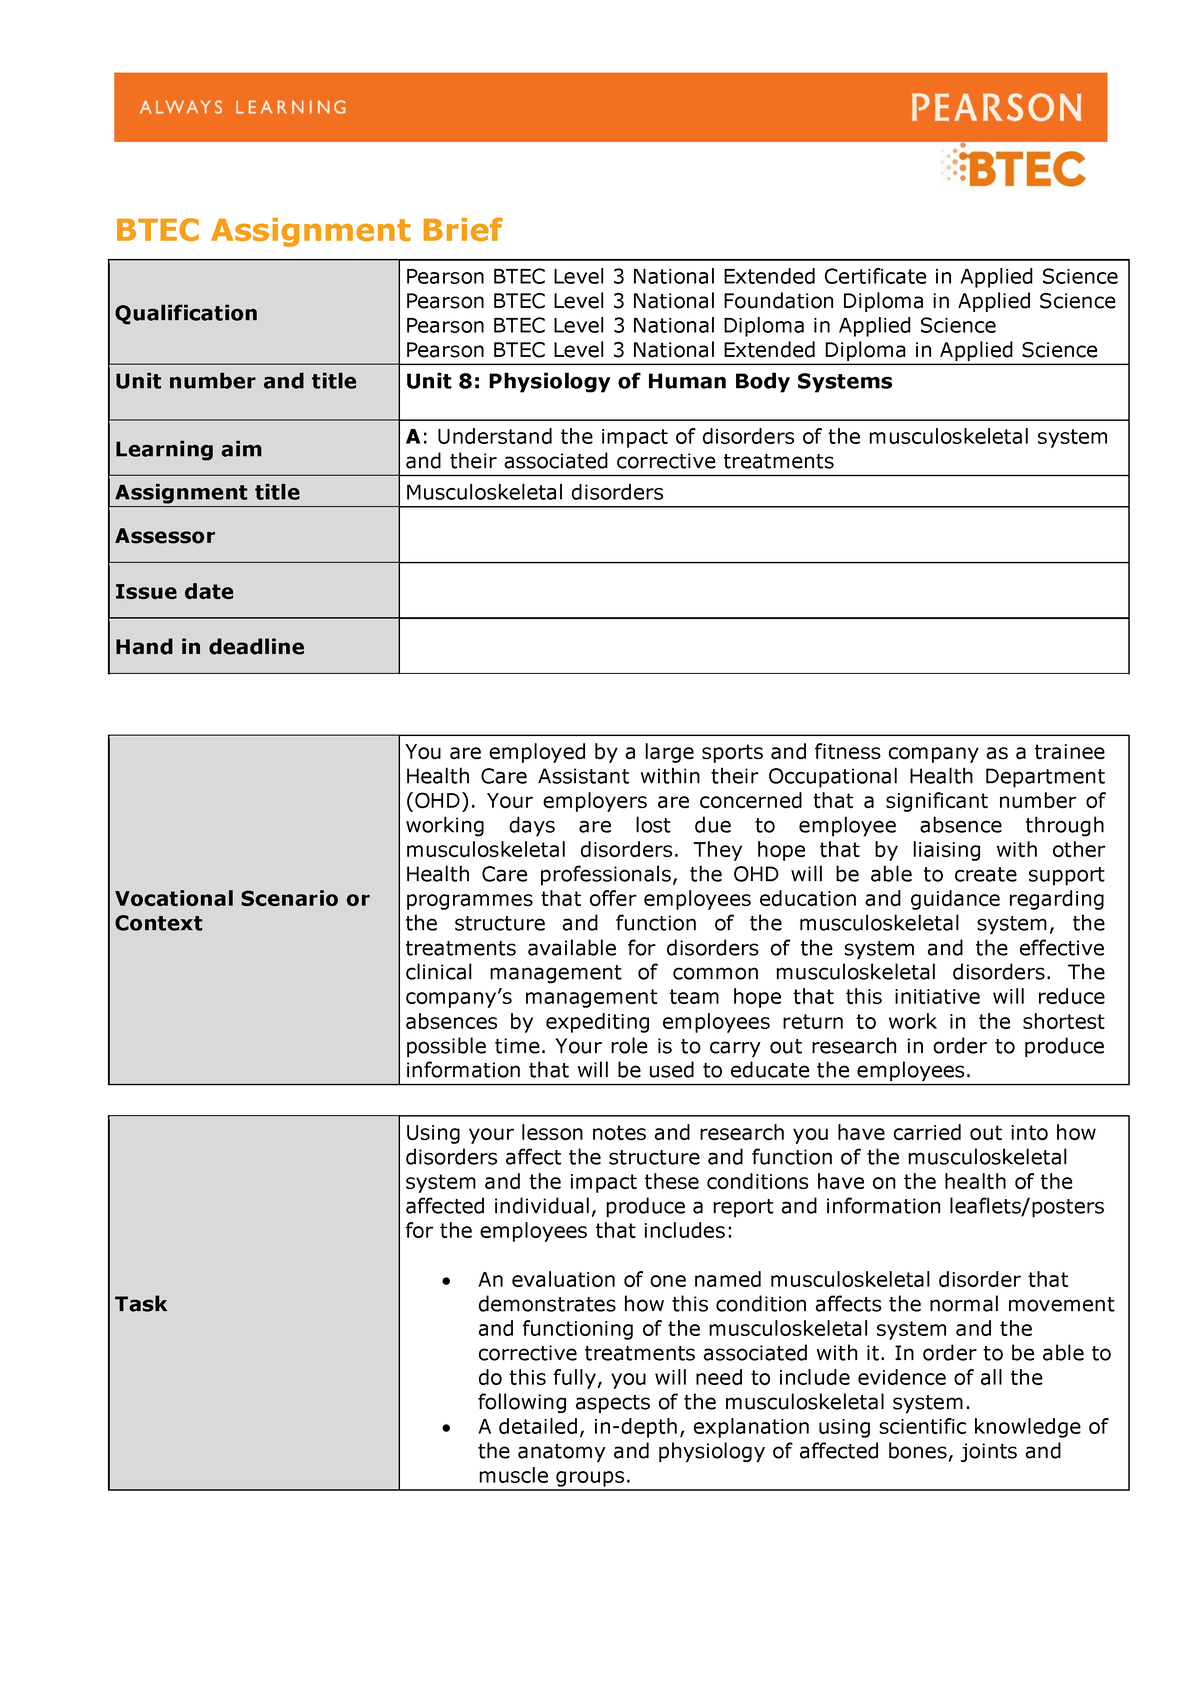 btec applied science level 3 unit 8 assignment briefs